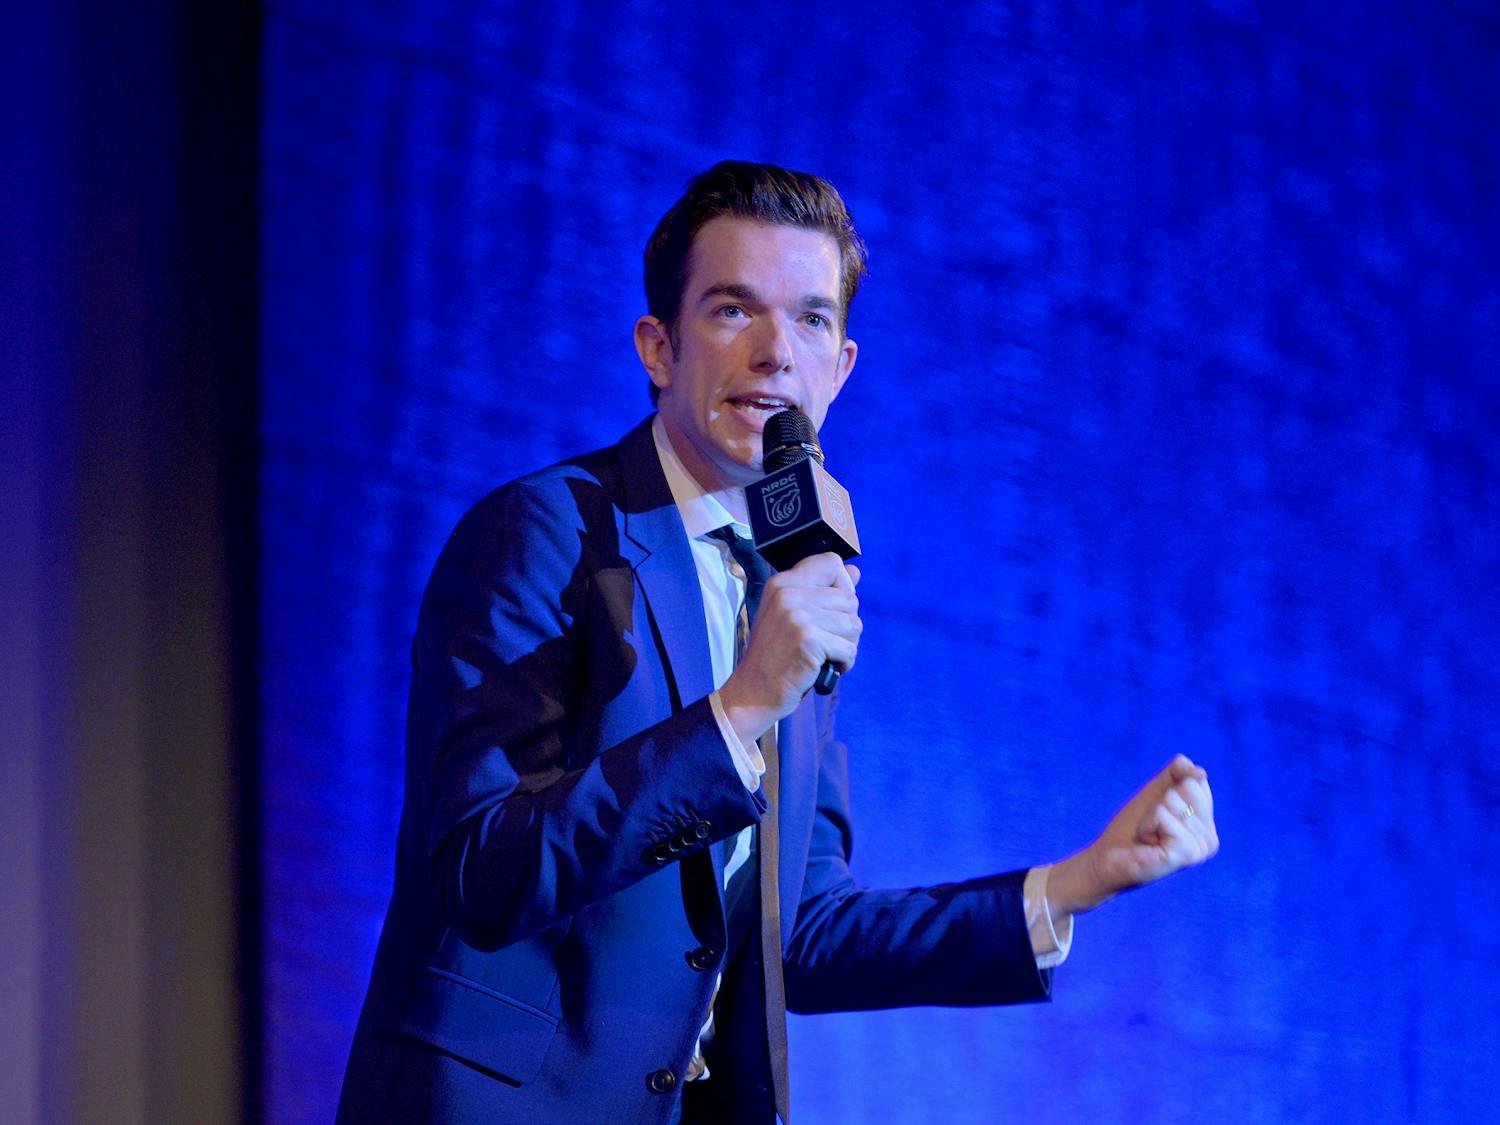 John Mulaney performs onstage at NRDC's "Night of Comedy" Benefit, in partnership with Discovery, Inc. hosted by Seth Meyers, on April 30, 2019, in New York City. Photo Courtesy of Getty Images. 